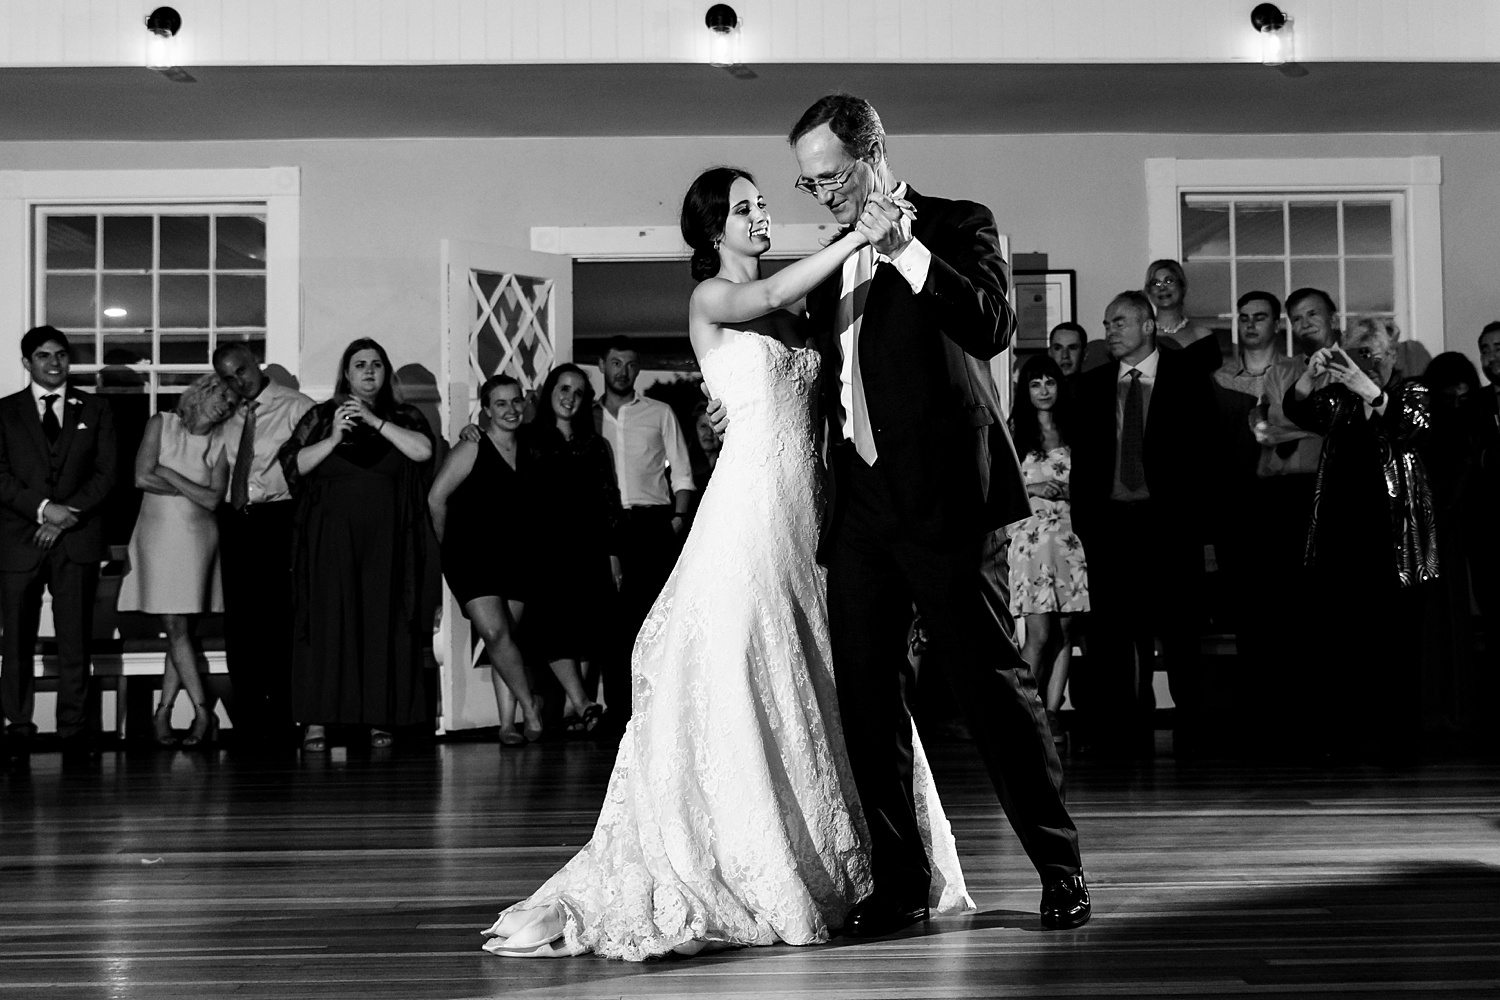 Dance with her father on the wedding day